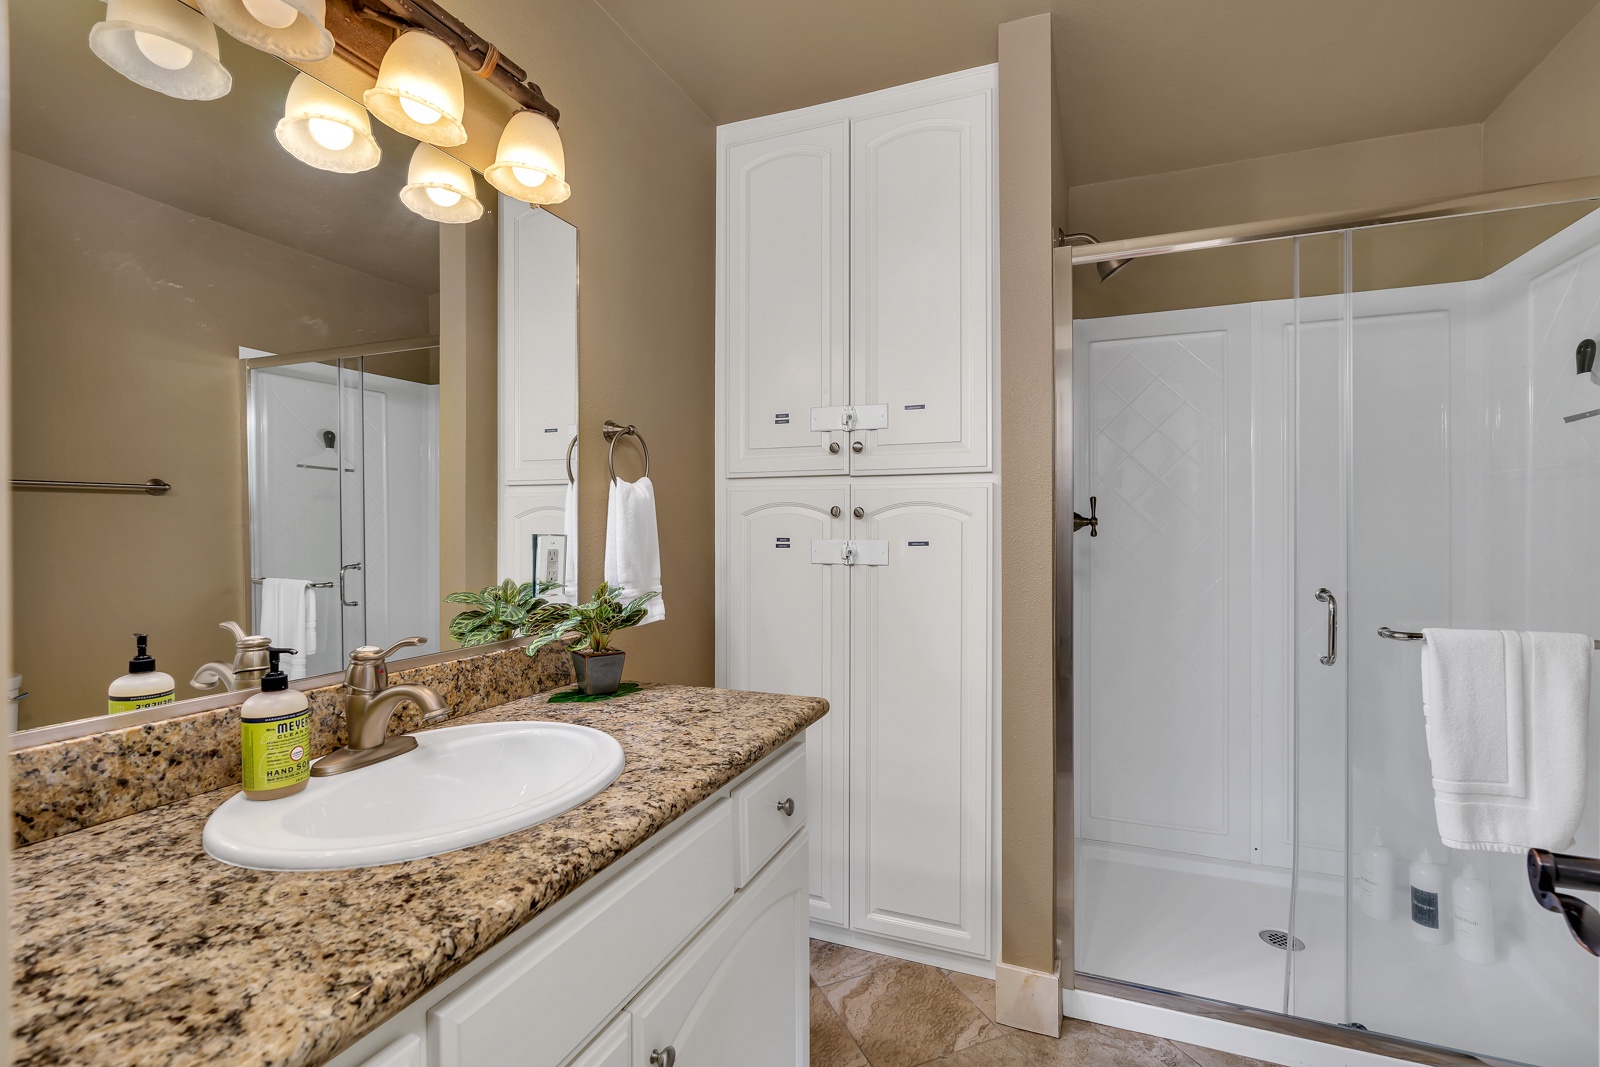 The lower-level full bathroom offers a large single vanity & glass shower